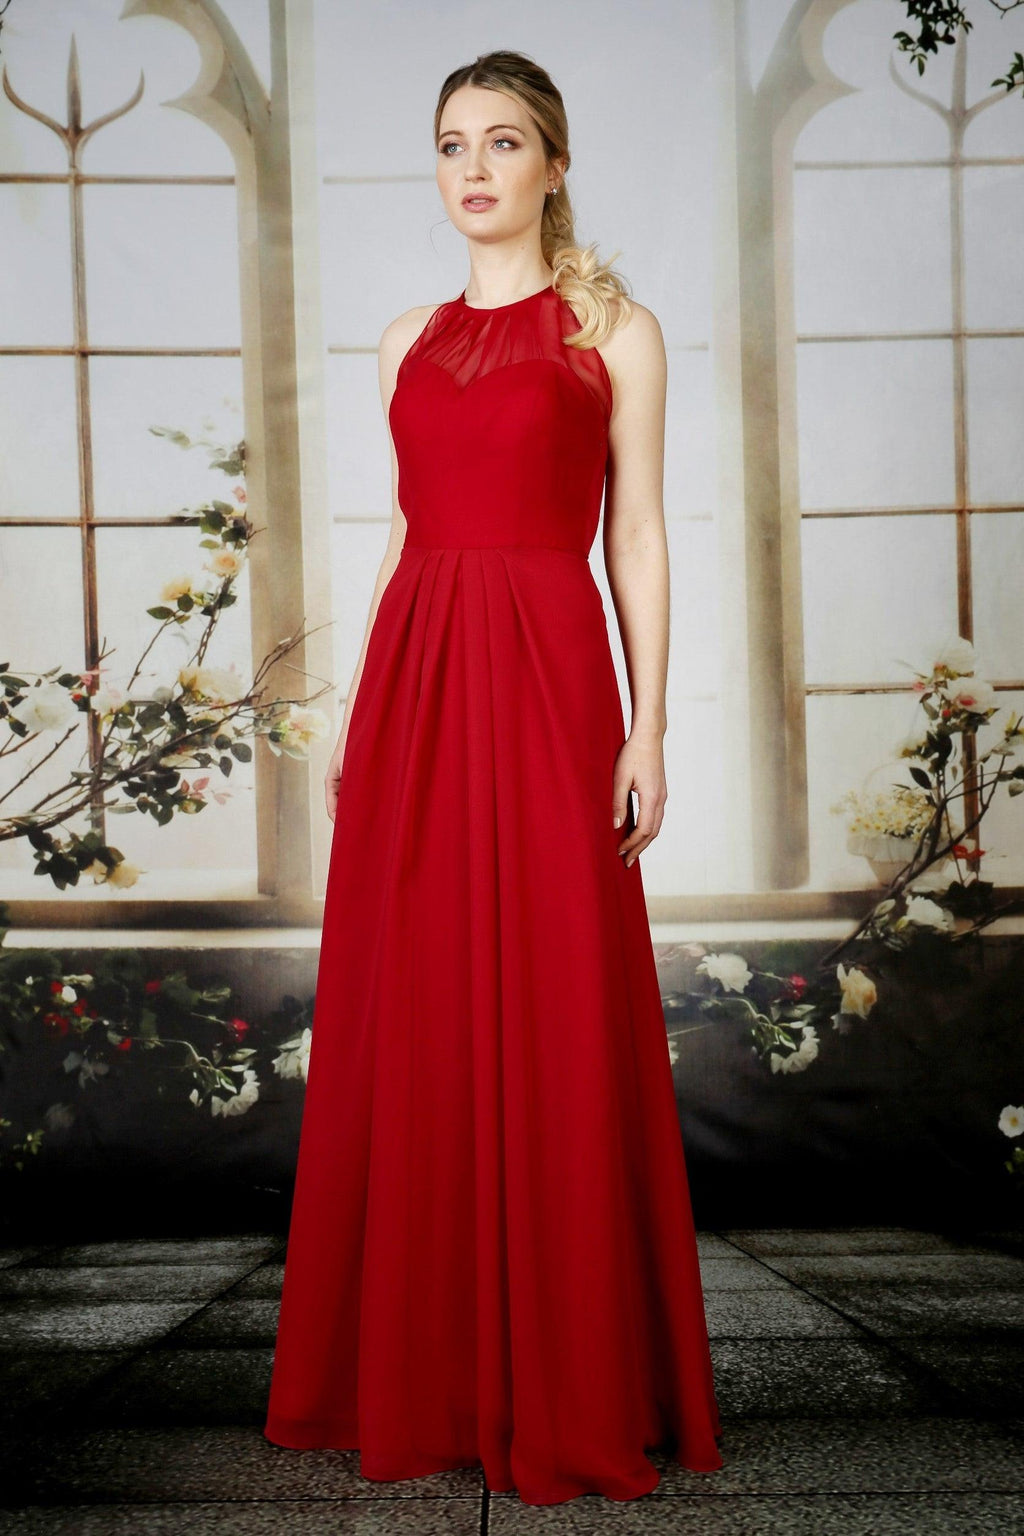 PAULA - Nieve Occasion - Adore Bridal and Occasion Wear